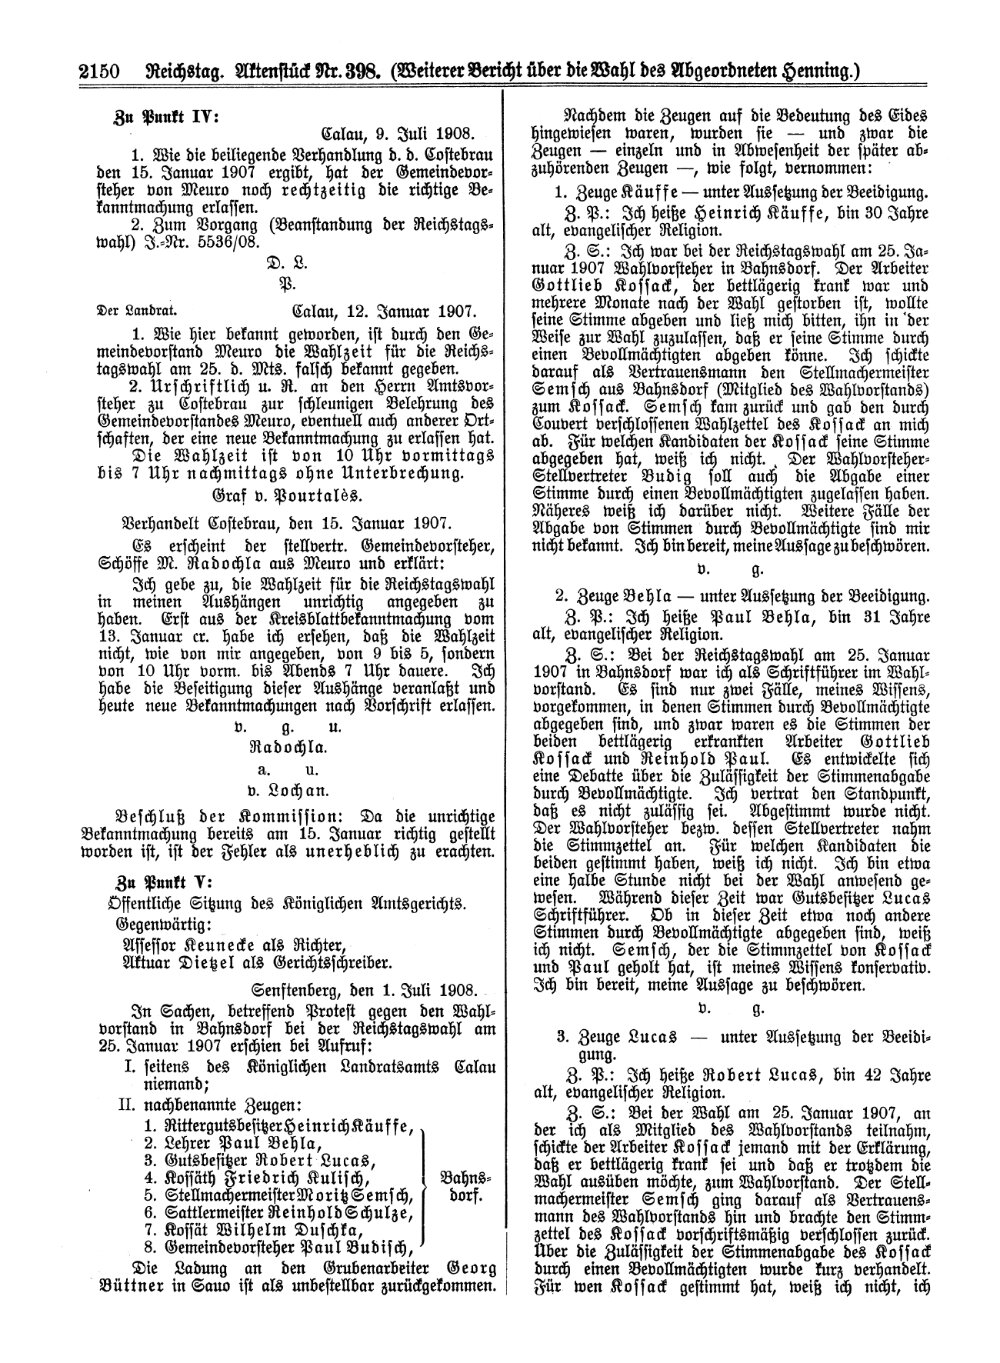 Scan of page 2150